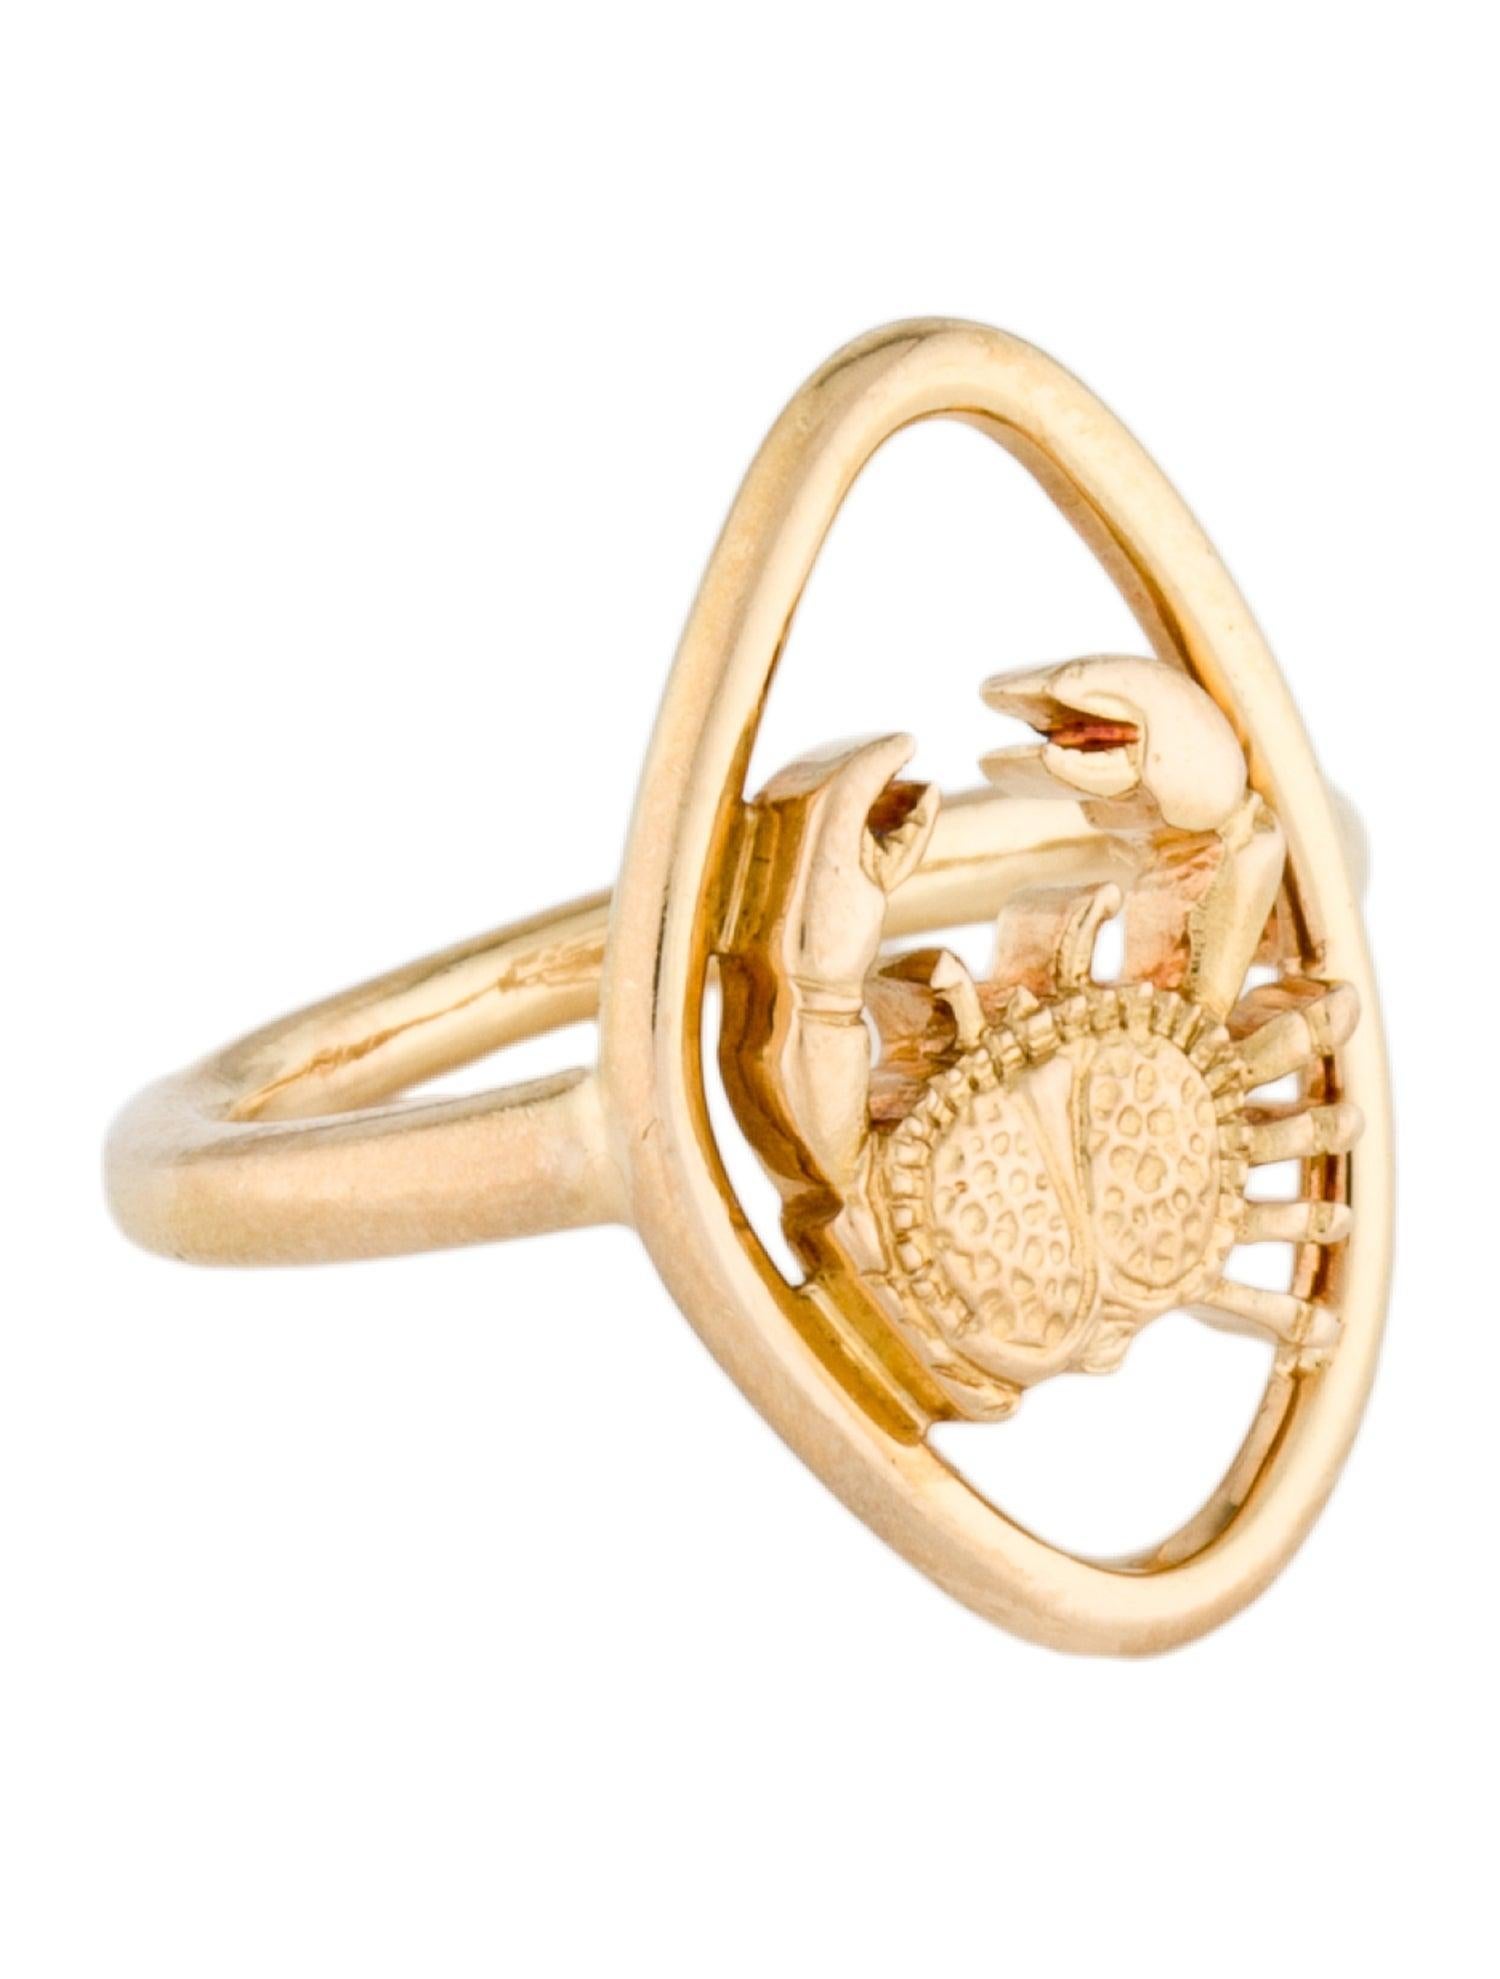 Boucheron Paris 18k Yellow Gold Cancer Zodiac Ring Vintage Circa 1970s

Here is your chance to purchase a beautiful and highly collectible designer ring.  

Metal Type: 18K Yellow Gold
Marks: Designer Signature, French Eagle Head
Total Item Weight